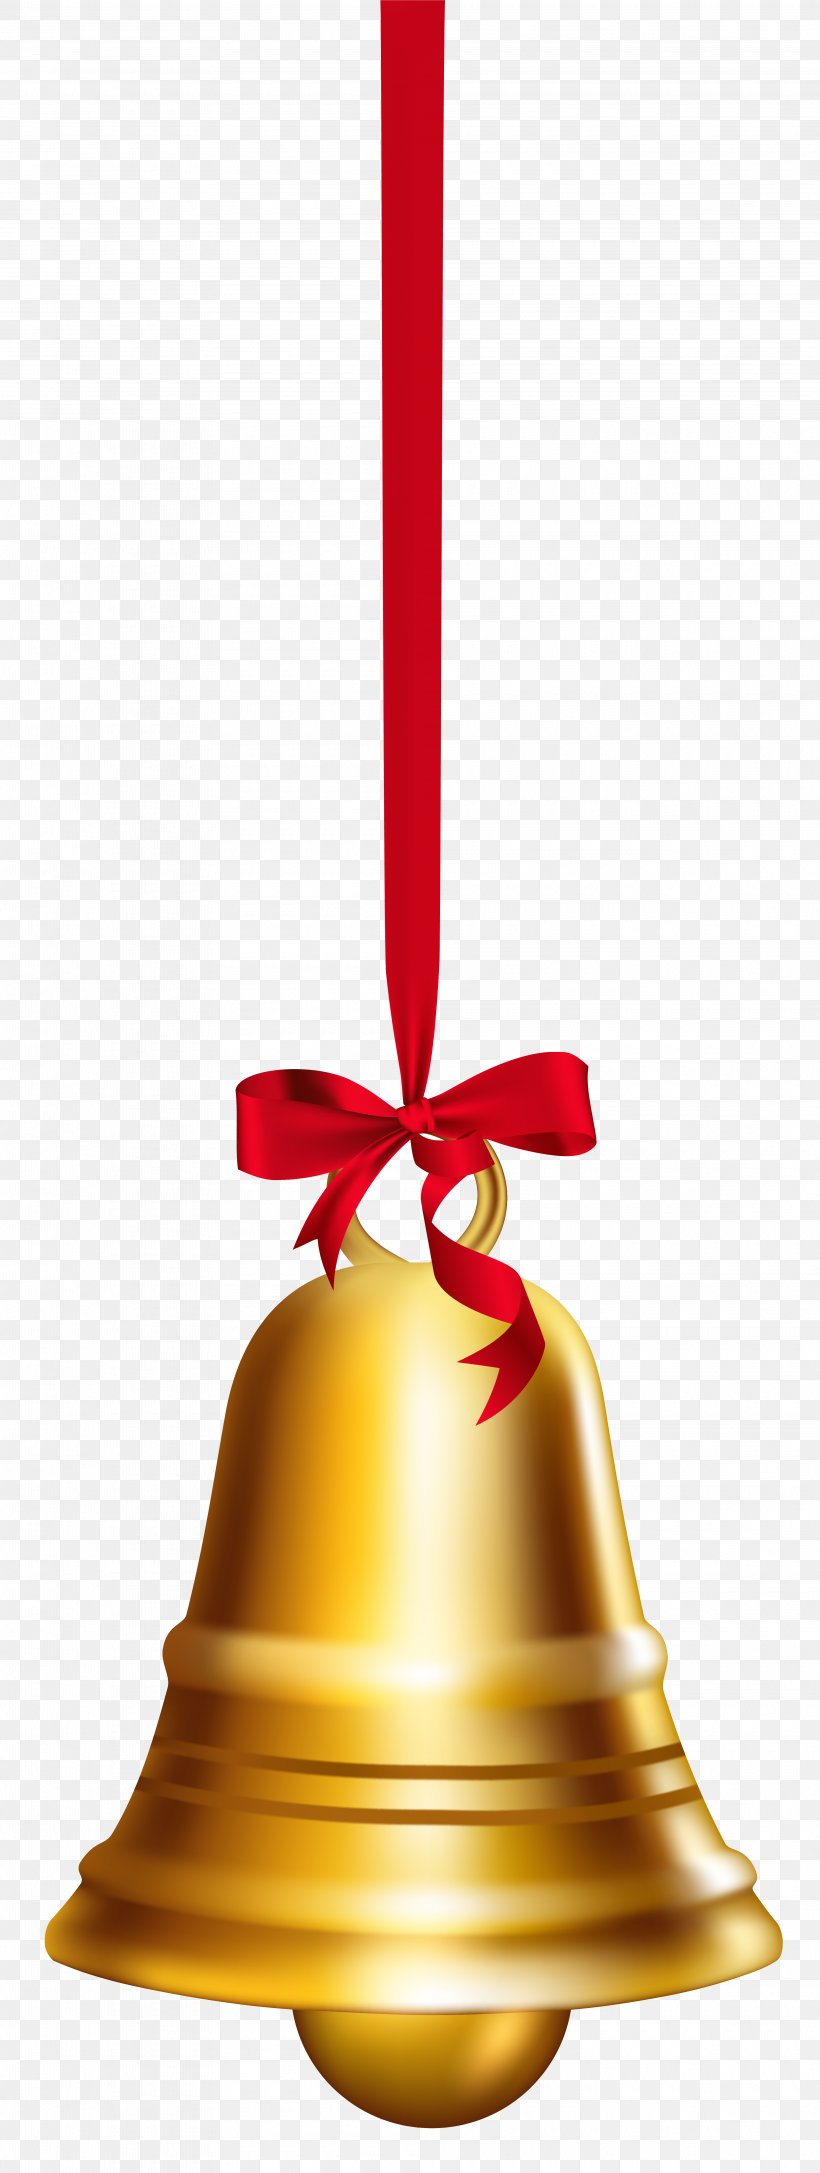 Bell Christmas Clip Art, PNG, 3960x10496px, Bell, Christmas, Royalty Free, Stock Photography, Thumbnail Download Free